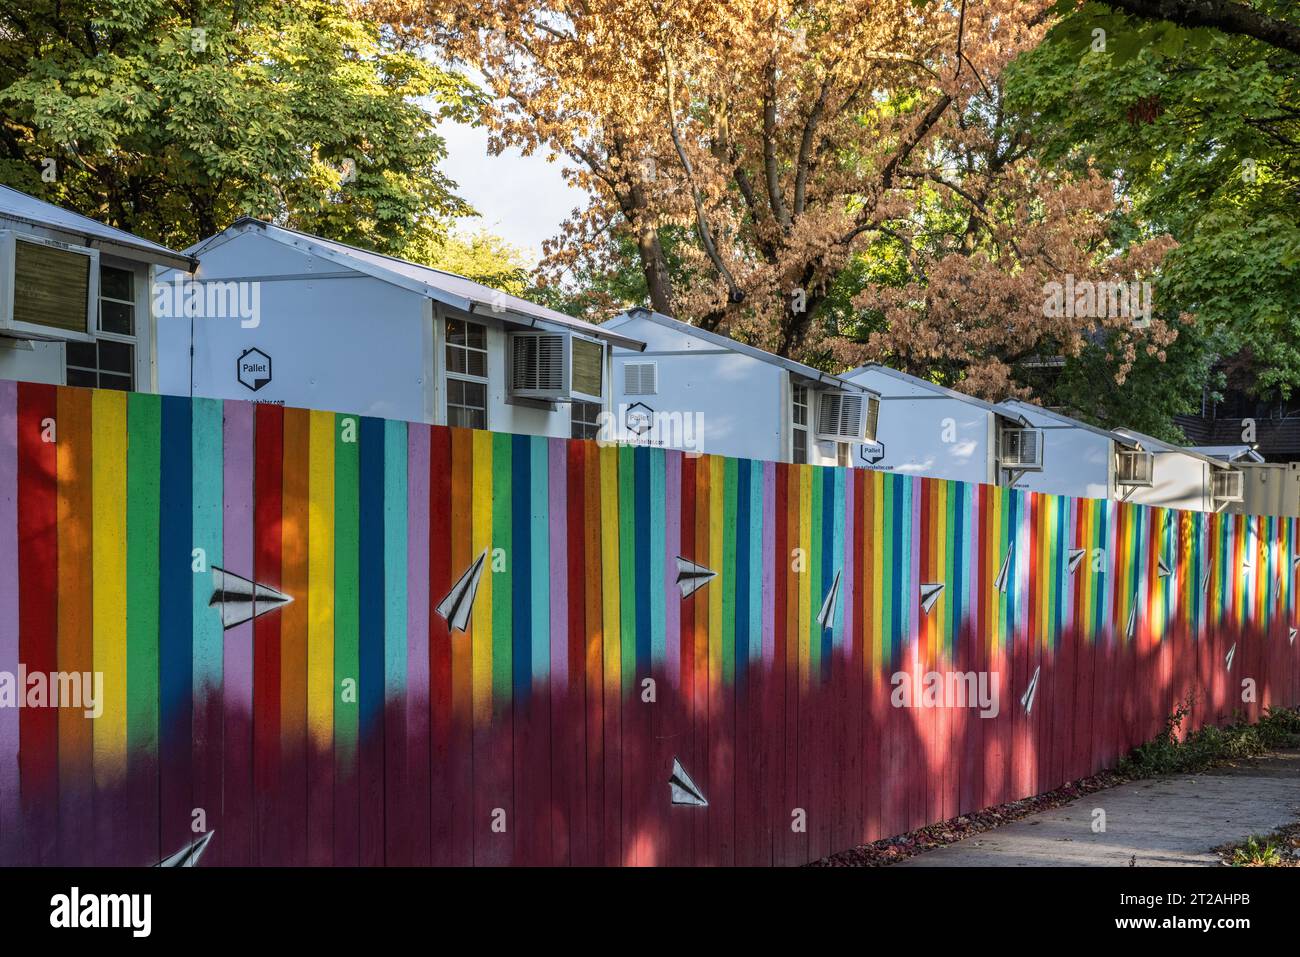 Queer Affinity Village Shelter for Unhoused LGBTQ Individuals, Portland, Oregon Stock Photo